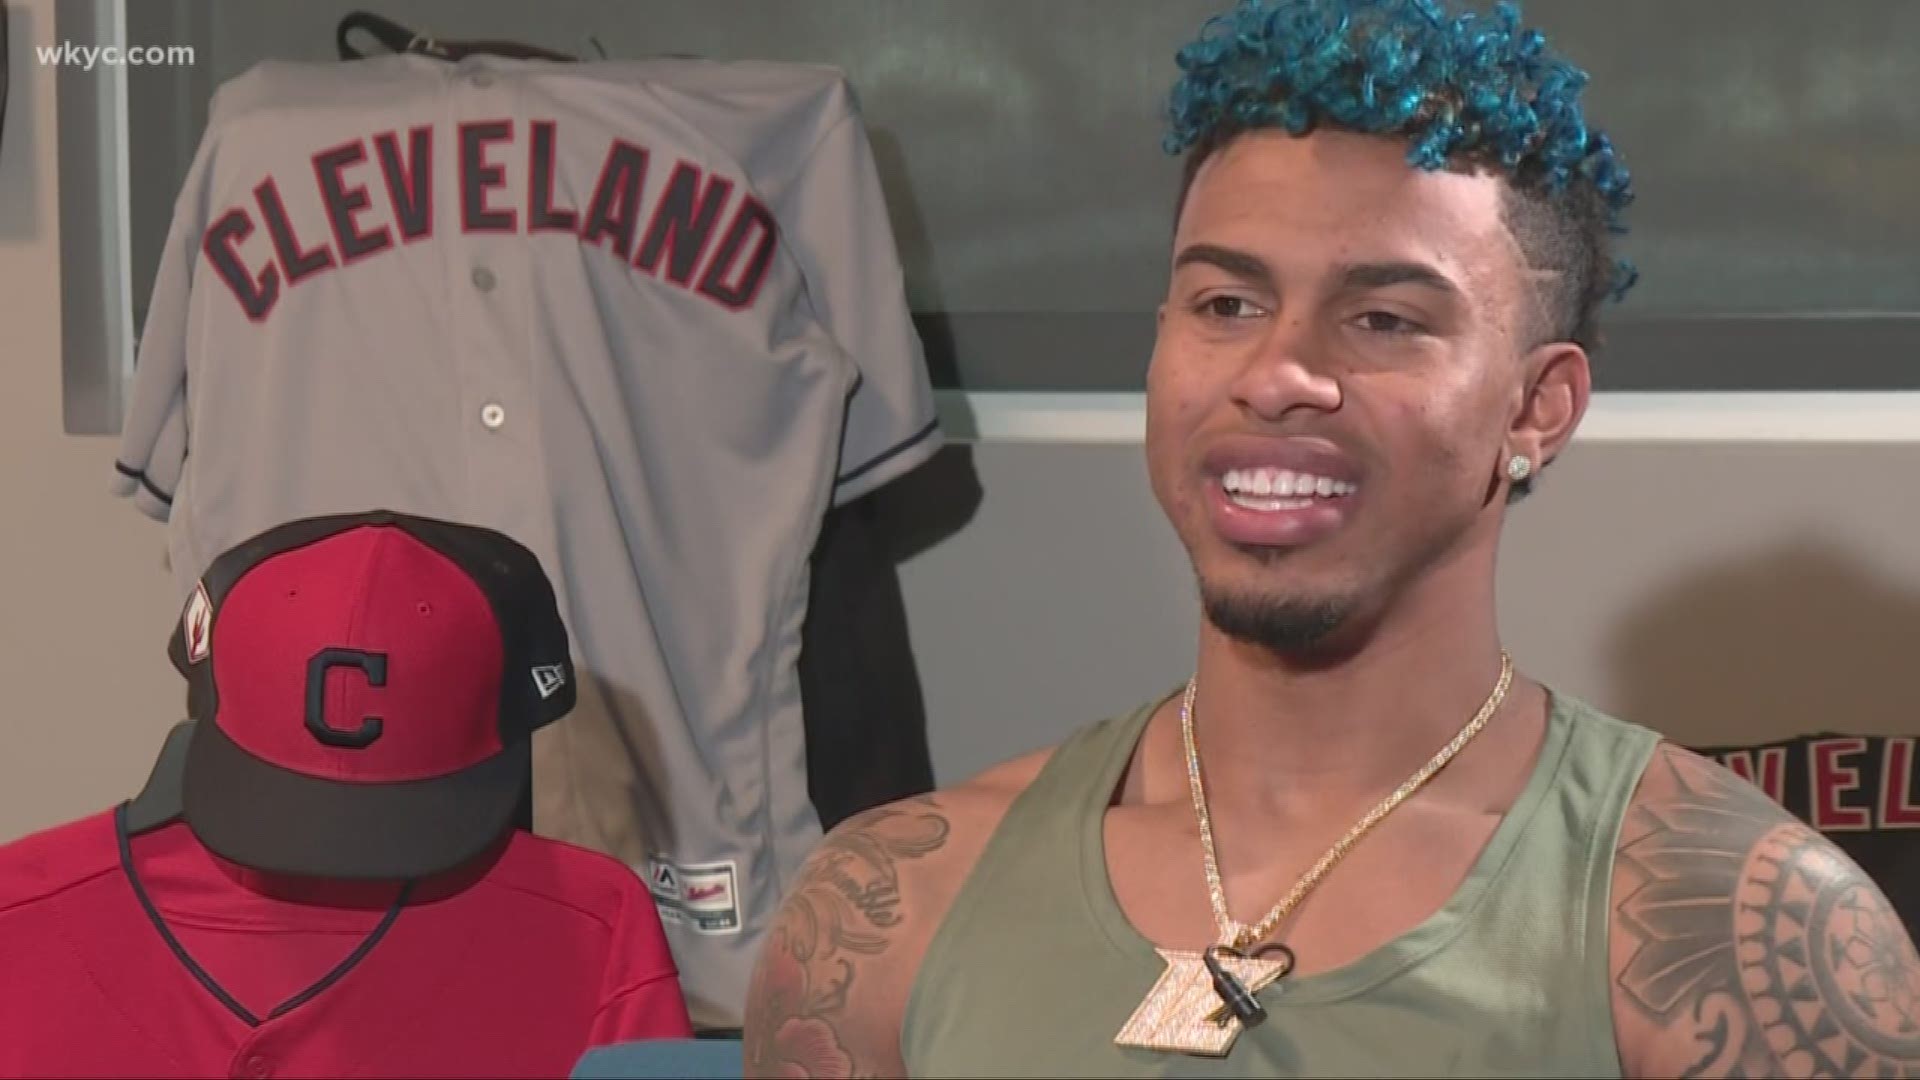 Sept. 9, 2019: Get to know more about Francisco Lindor as we go 'Beyond the Dugout' with the Cleveland Indians Shortstop. Did you know his favorite TV show is 'Duck Dynasty'?